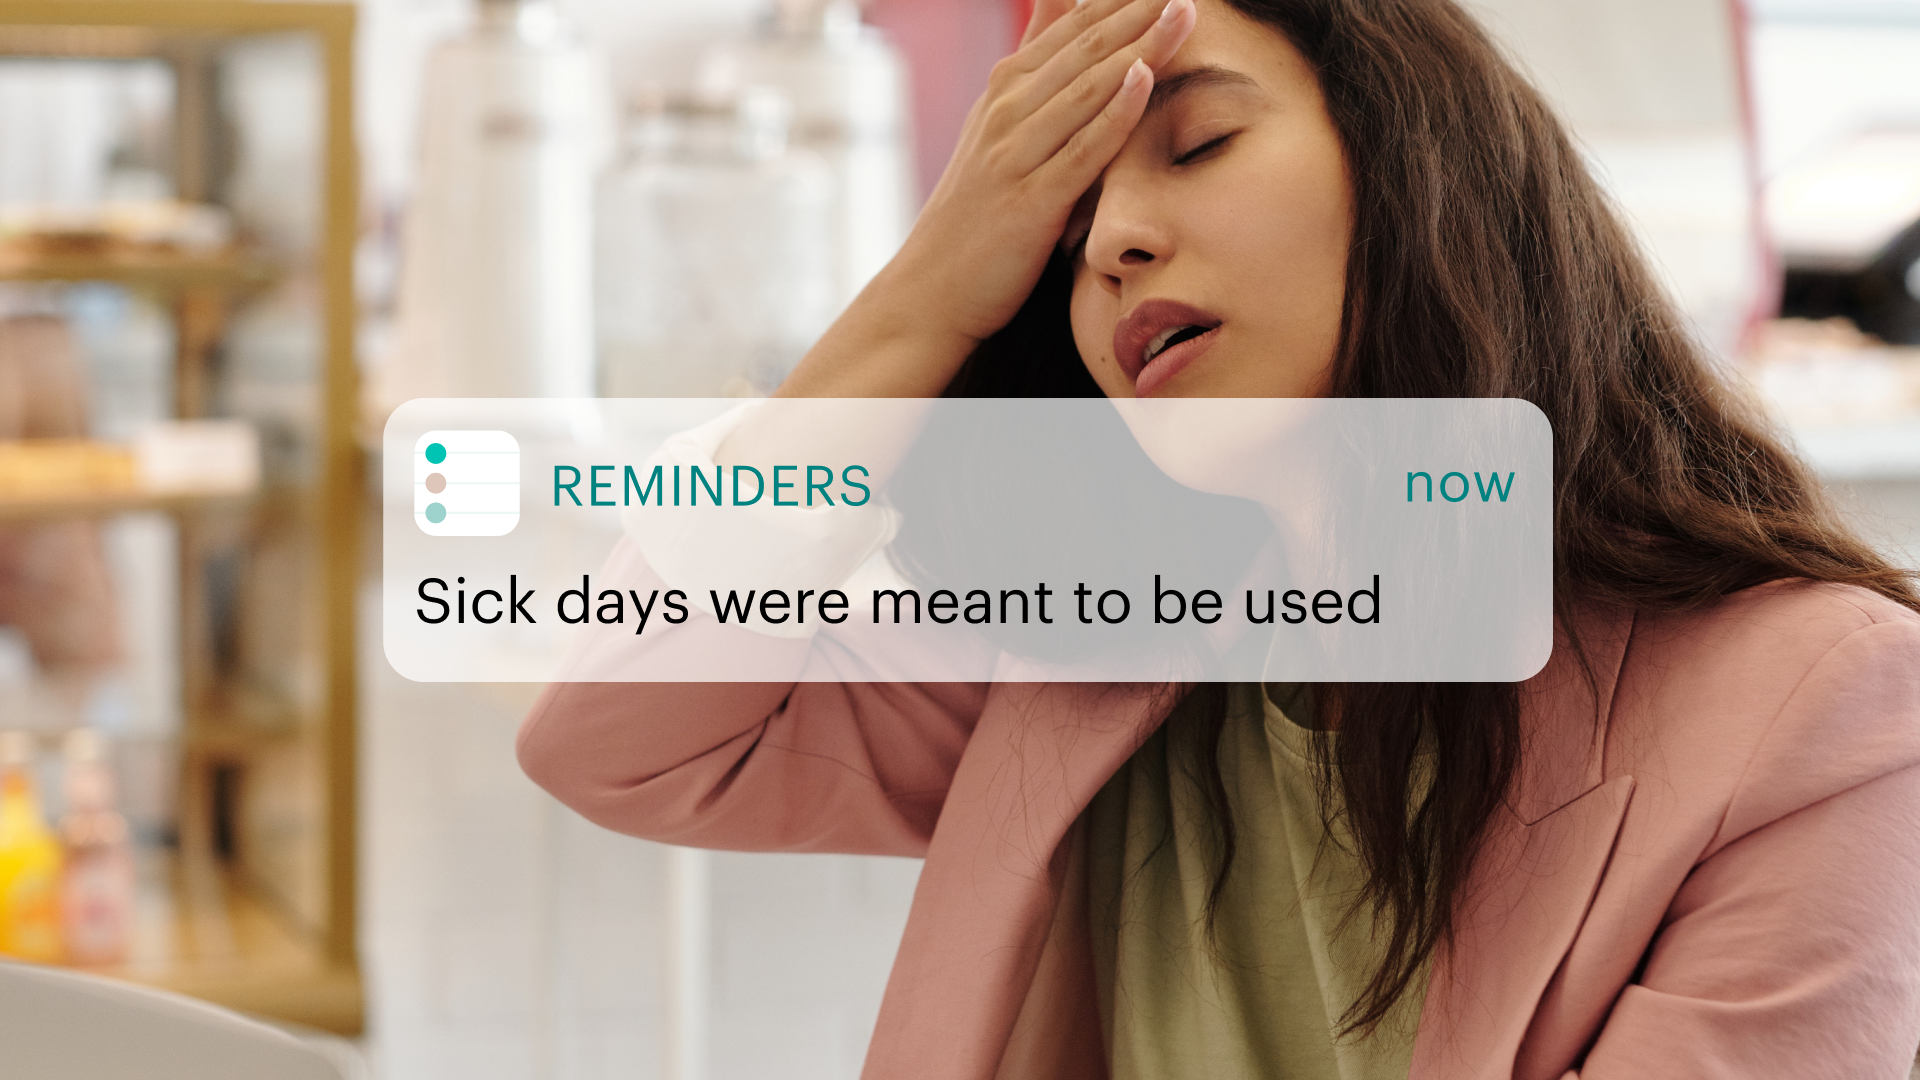 A reminder reads "Sick days were meant to be used" over a women with her hand on her forehead